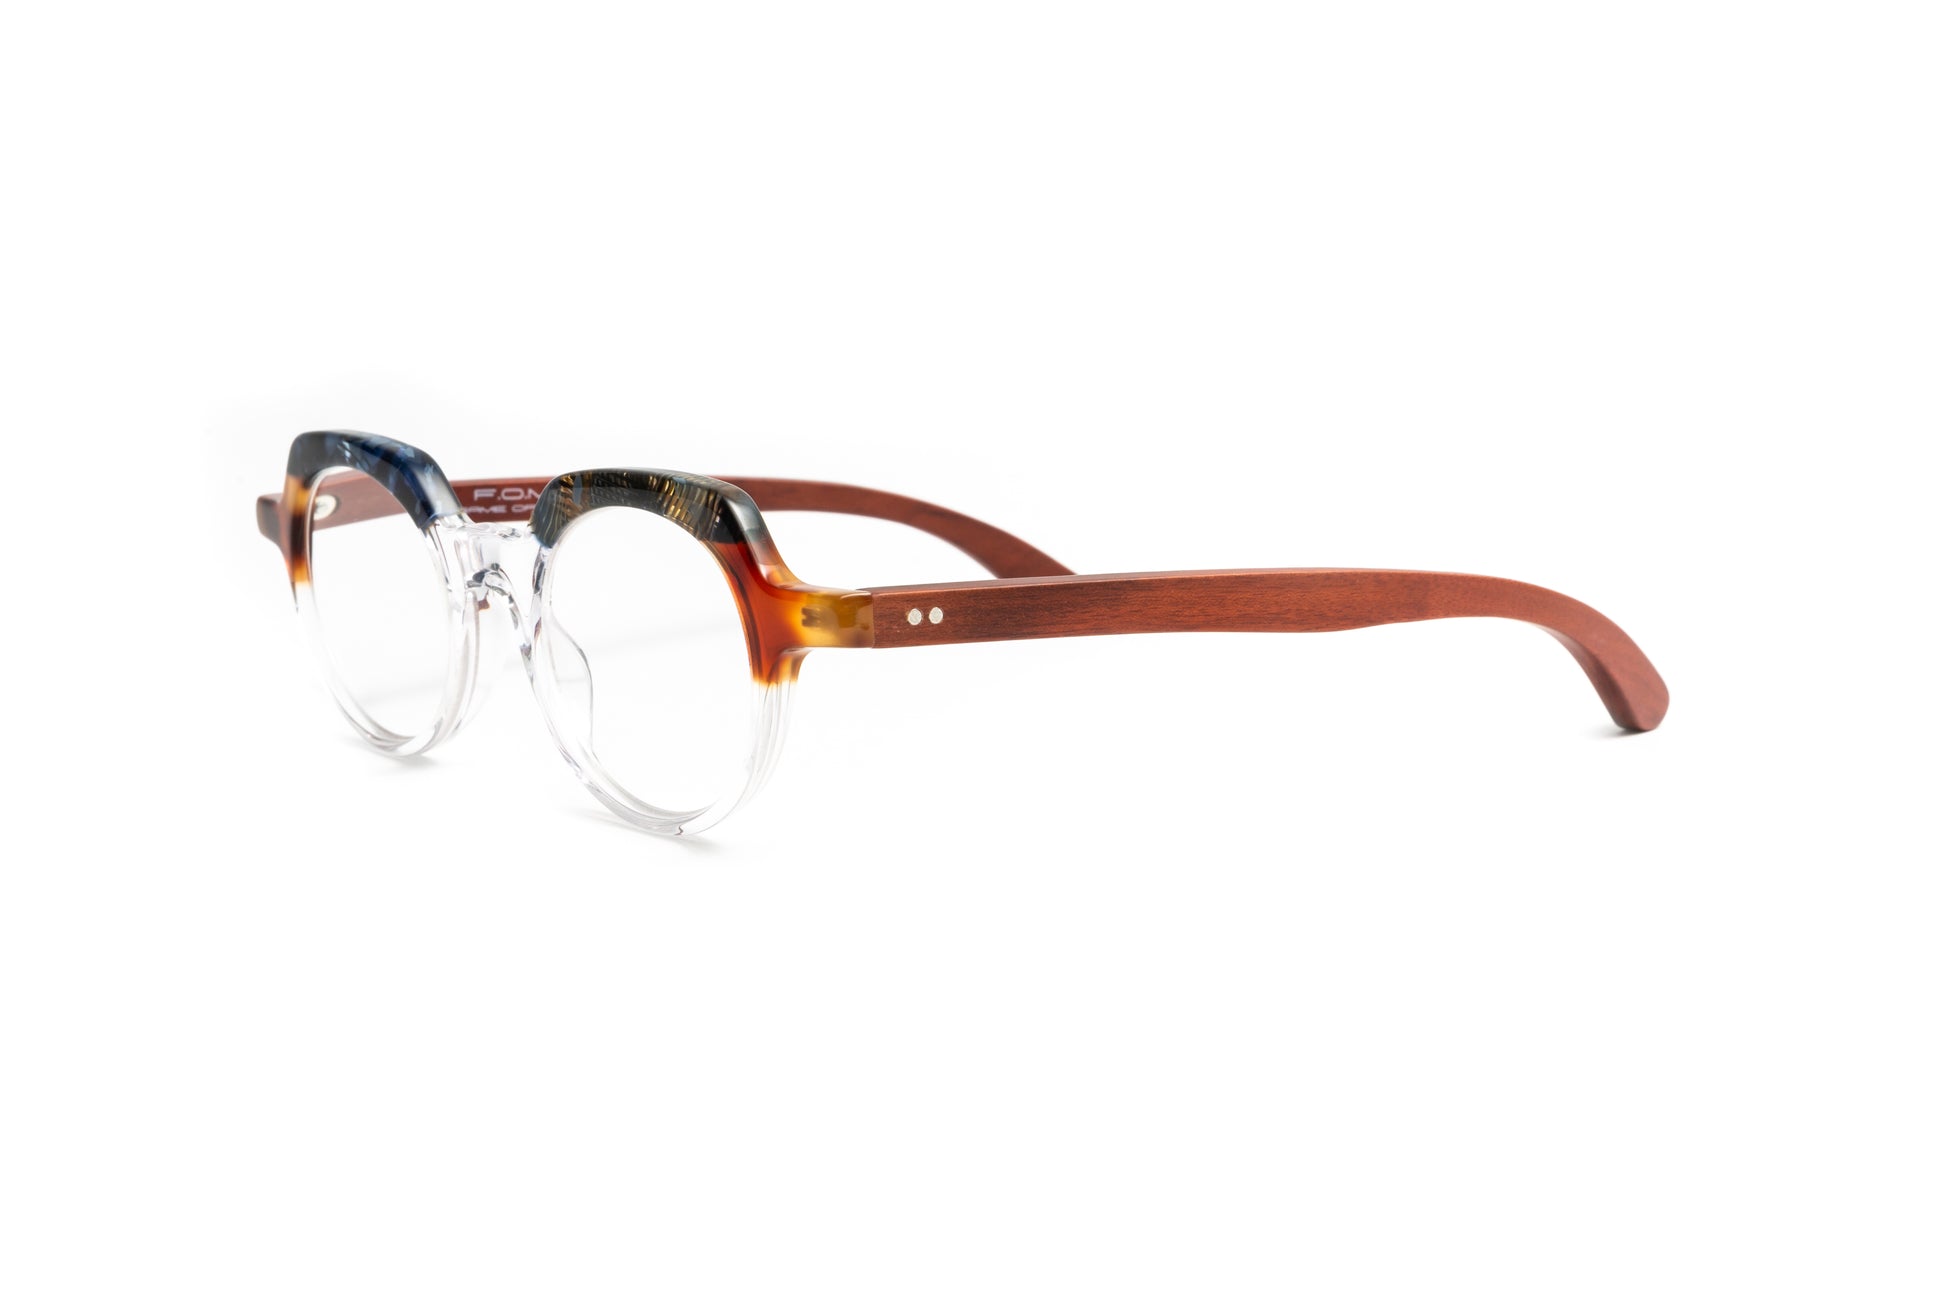 St Barths multi colored reading glasses made with black, tortoise and clear acetate and cherry wood temples for men and women